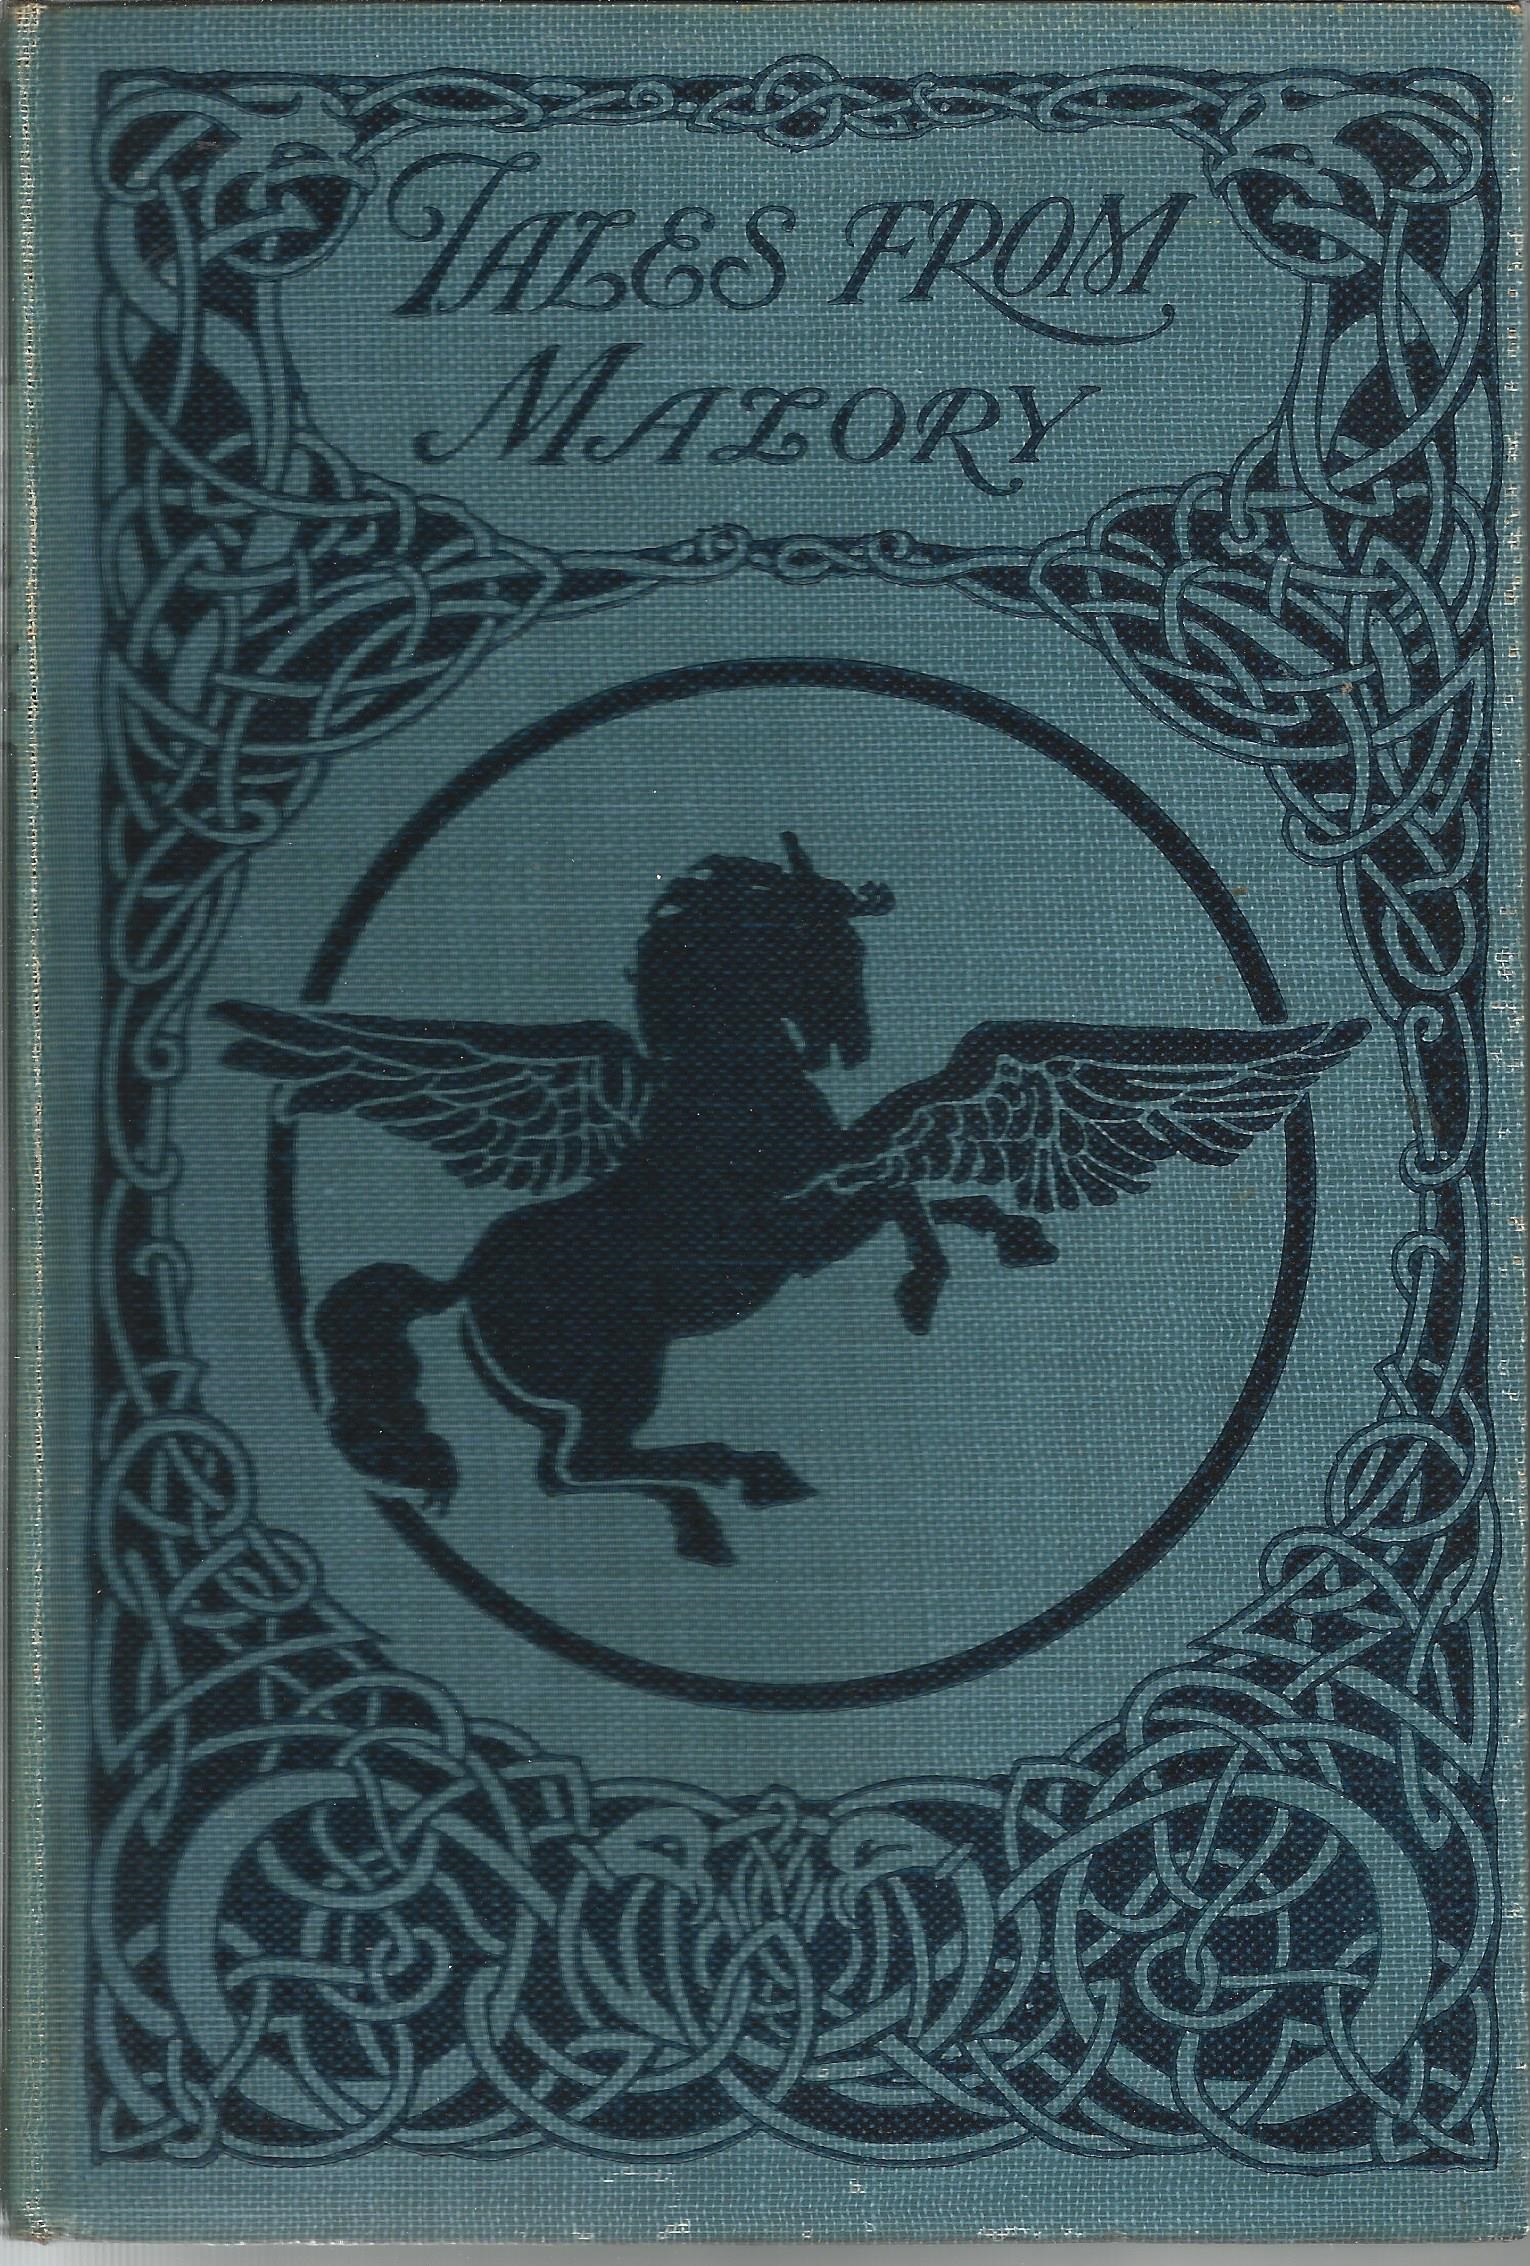 Tales From Malory by U Waldo Cutler. Unsigned hardback book with dedication on inside cover dated